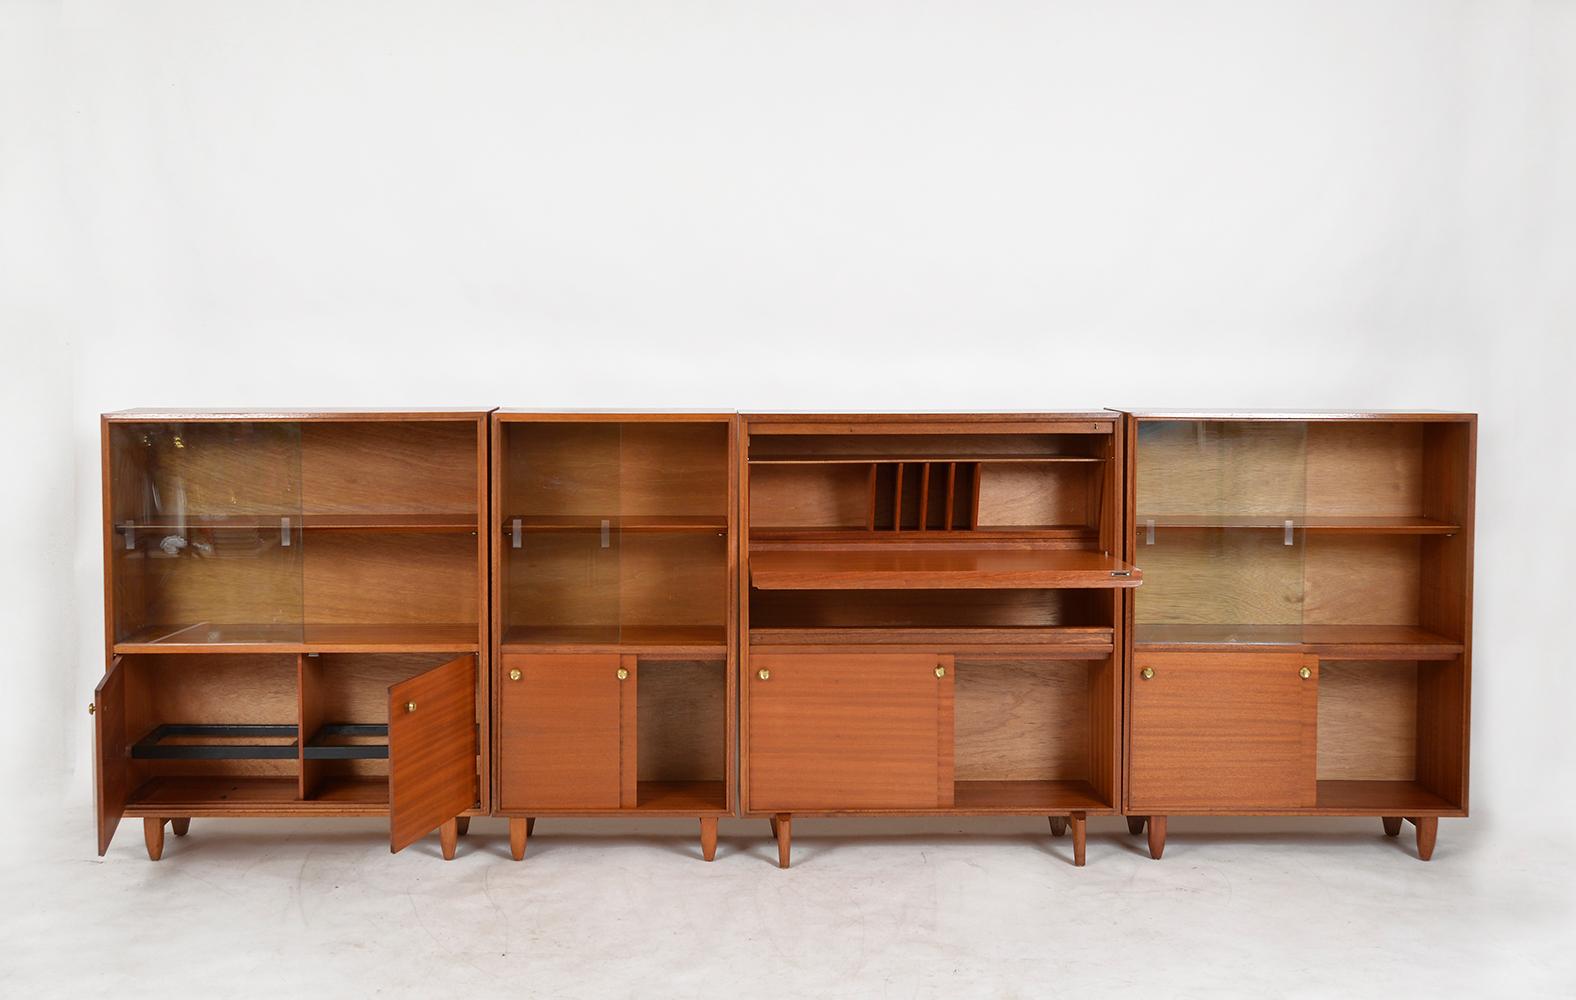 Four sections of ‘multi-width’ cabinets designed by Robert Heritage for Beaver & Tapley. British designer Robert Heritage designed the modular ‘multi-width’ range in 1960, slim and compact enough not to take up too much room in the home, whilst